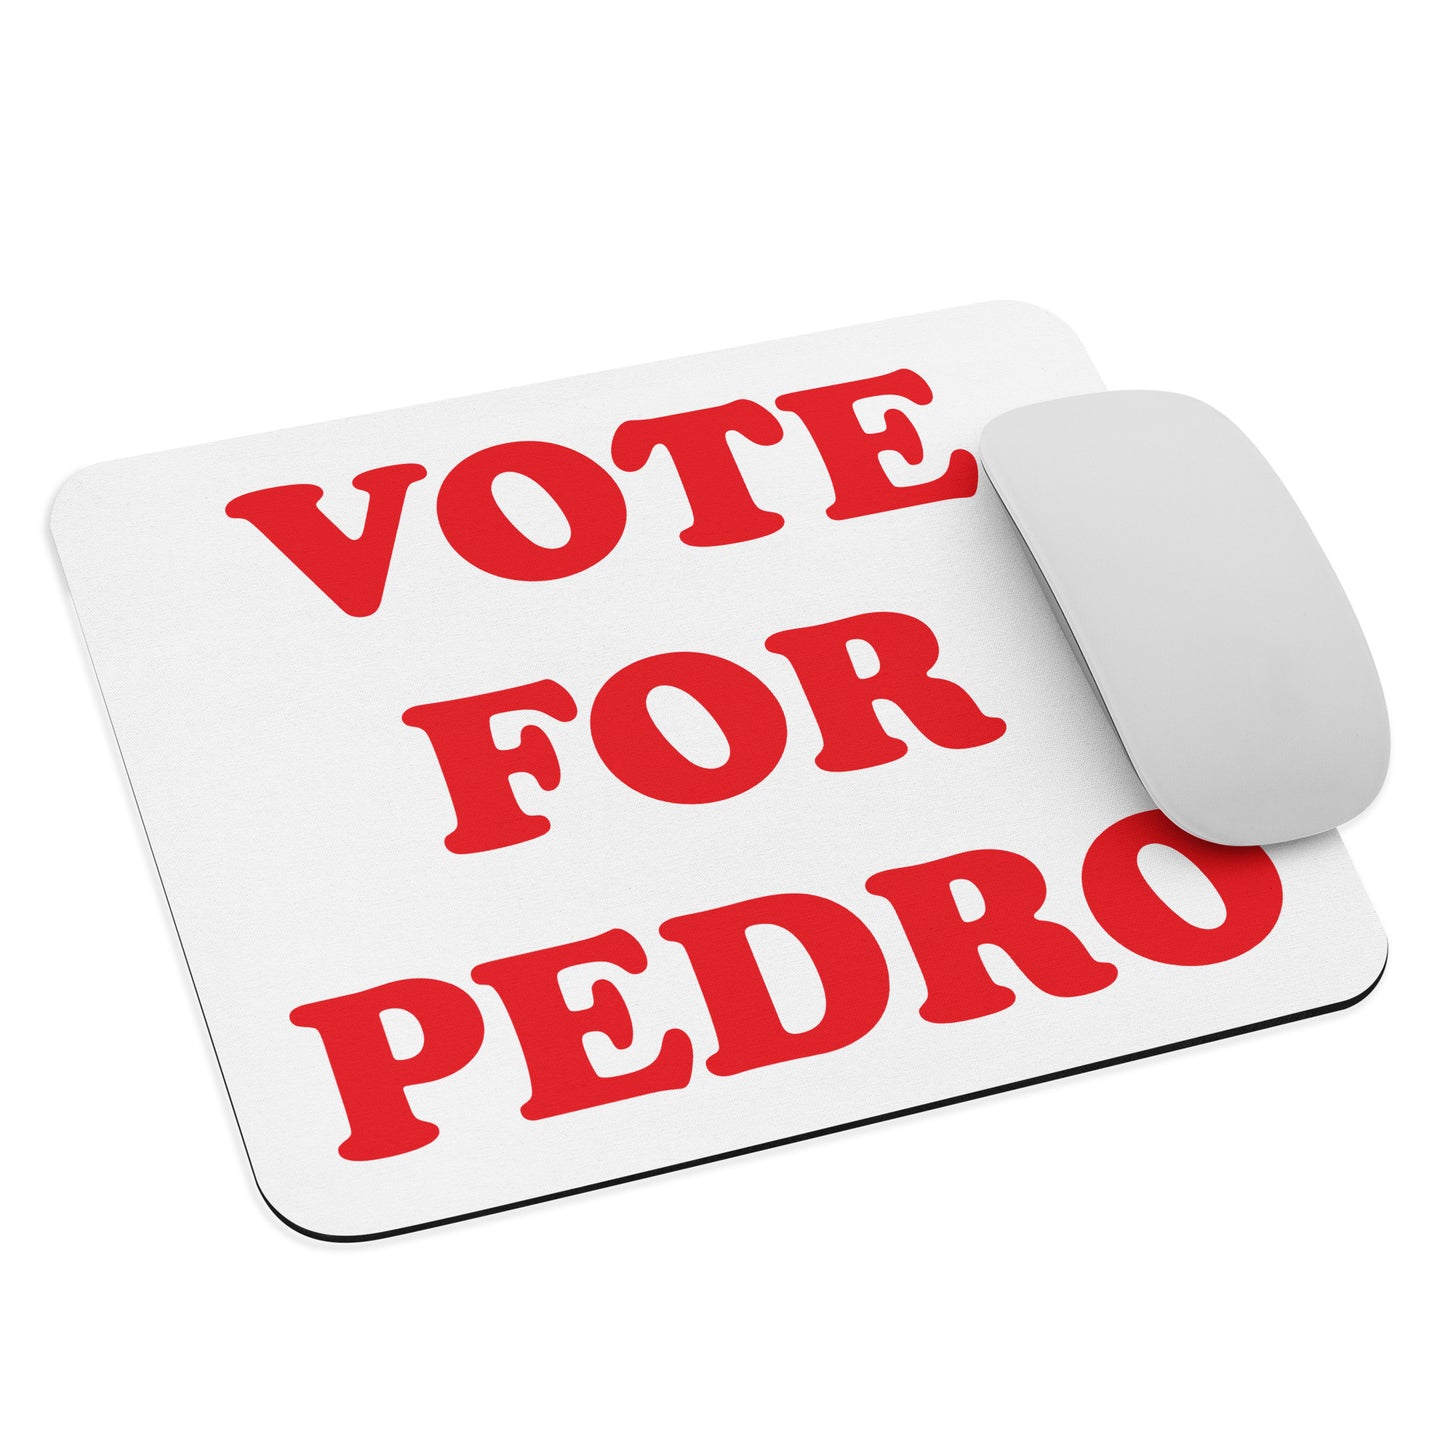 mouse-pad-with-text-saying-vote-for-pedro